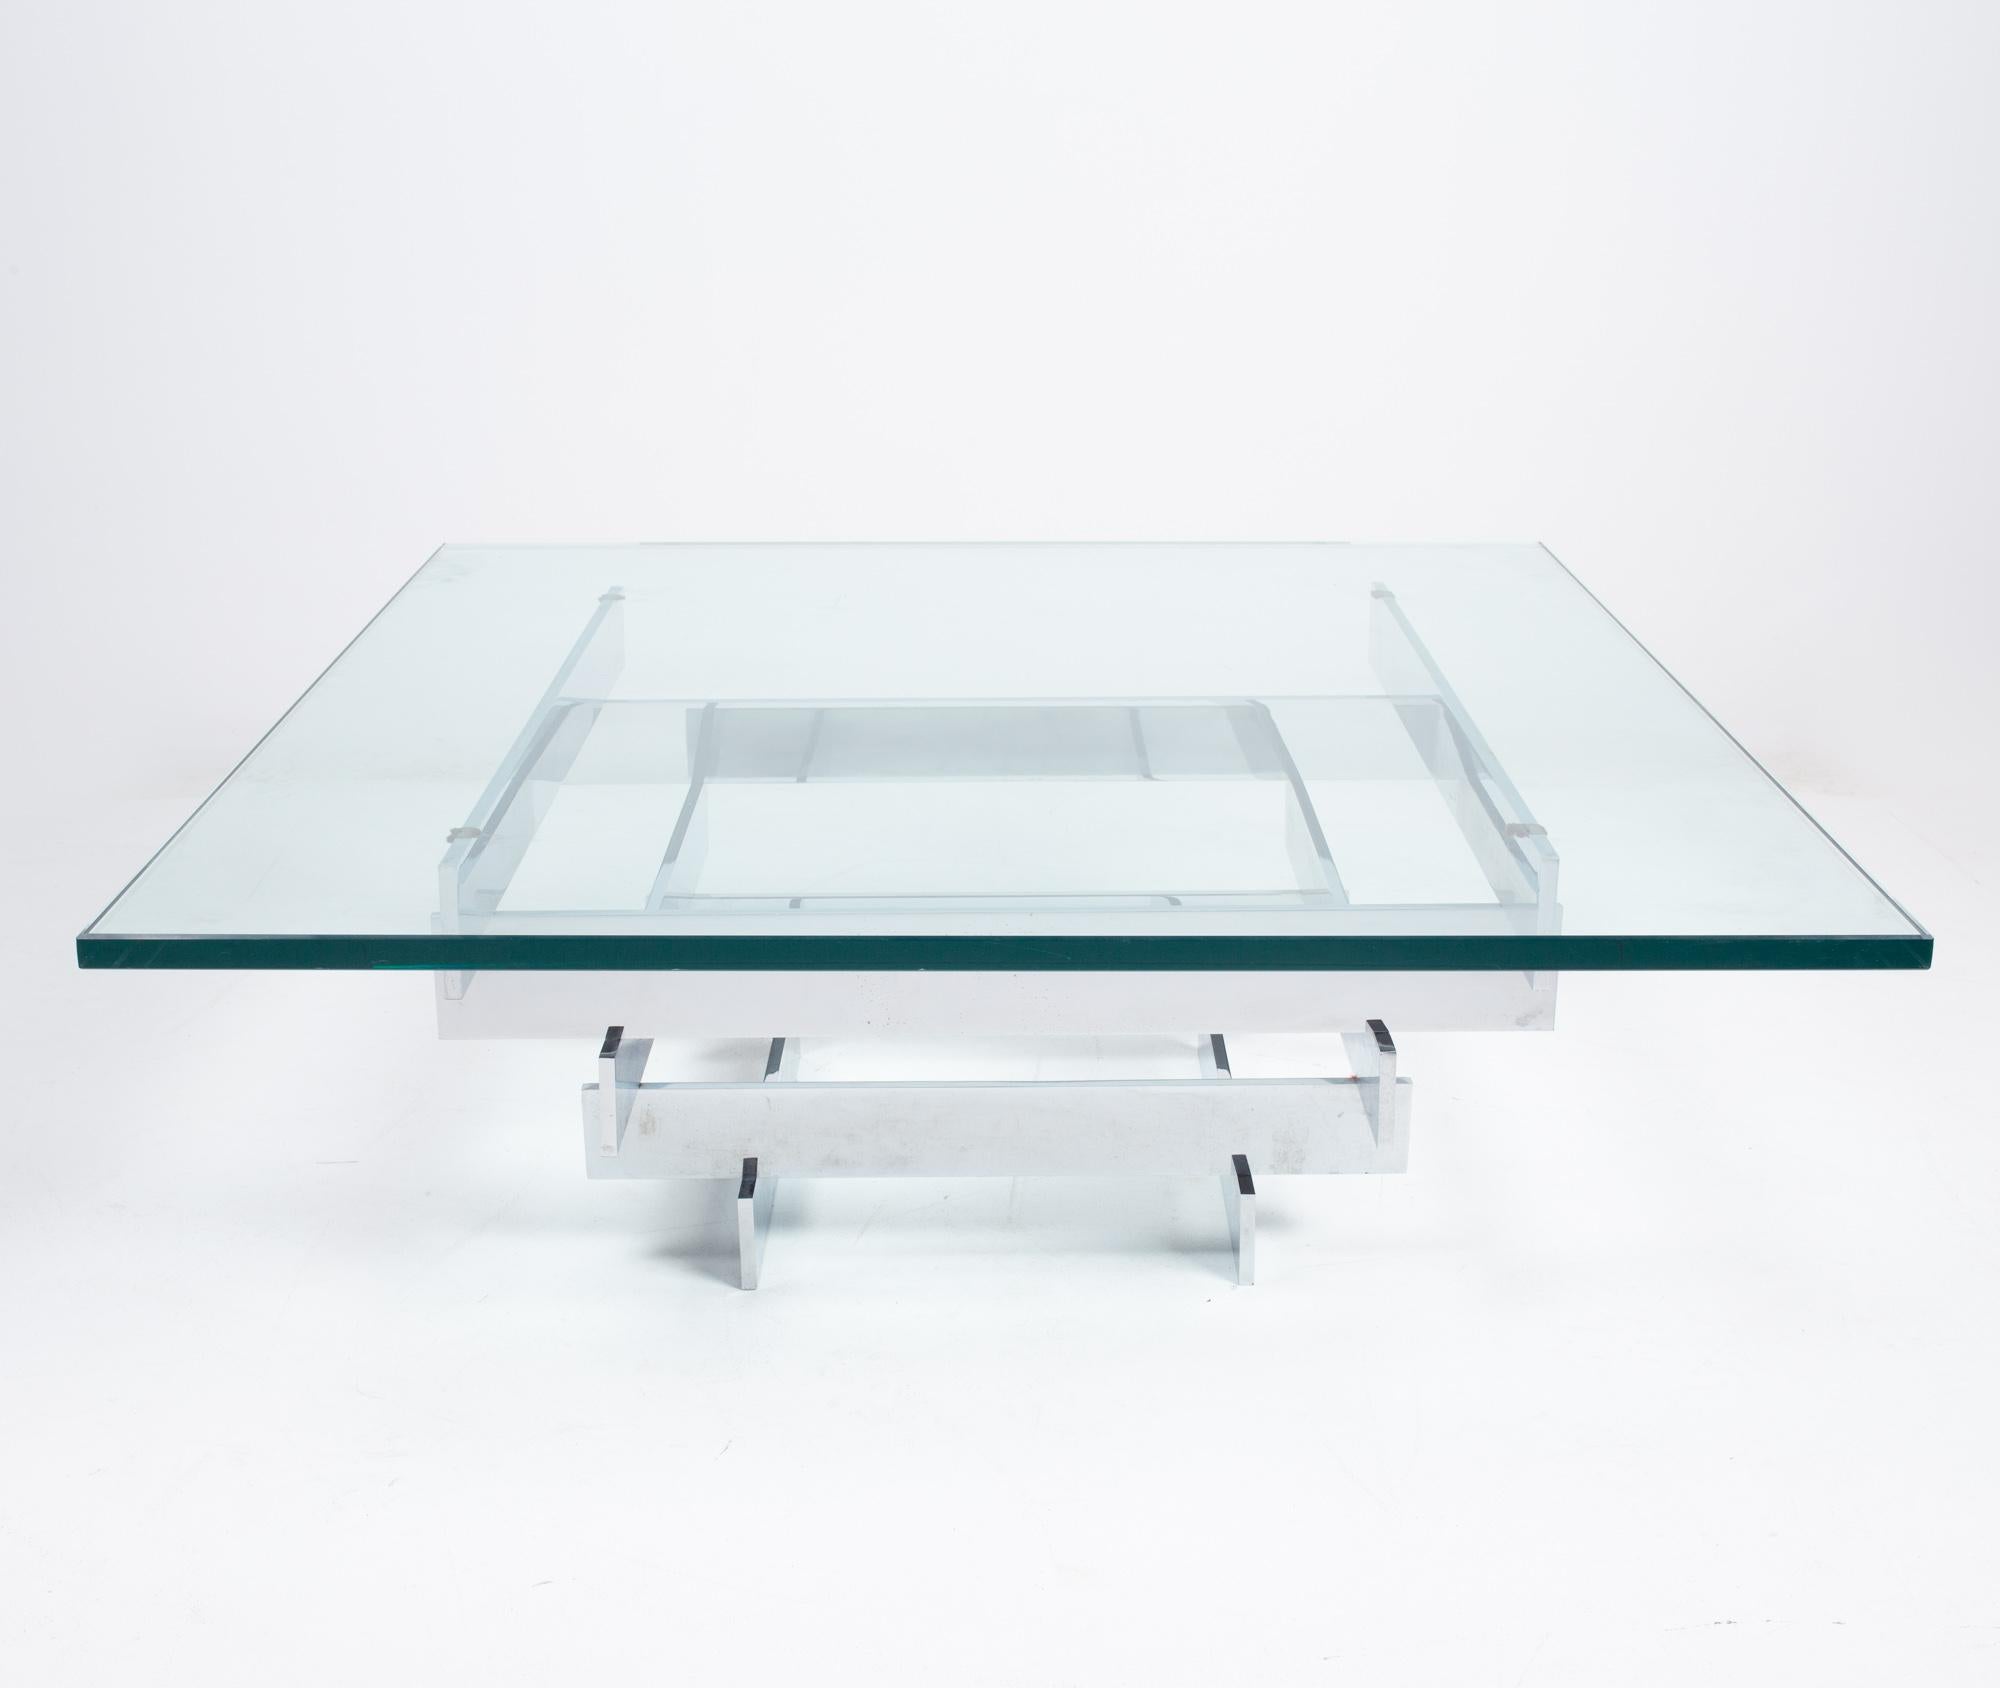 Paul Mayen for Habitat midcentury chrome and glass coffee table.

The table measures: 26 wide x 26 deep x 12.5 inches high

All pieces of furniture can be had in what we call restored vintage condition. That means the piece is restored upon